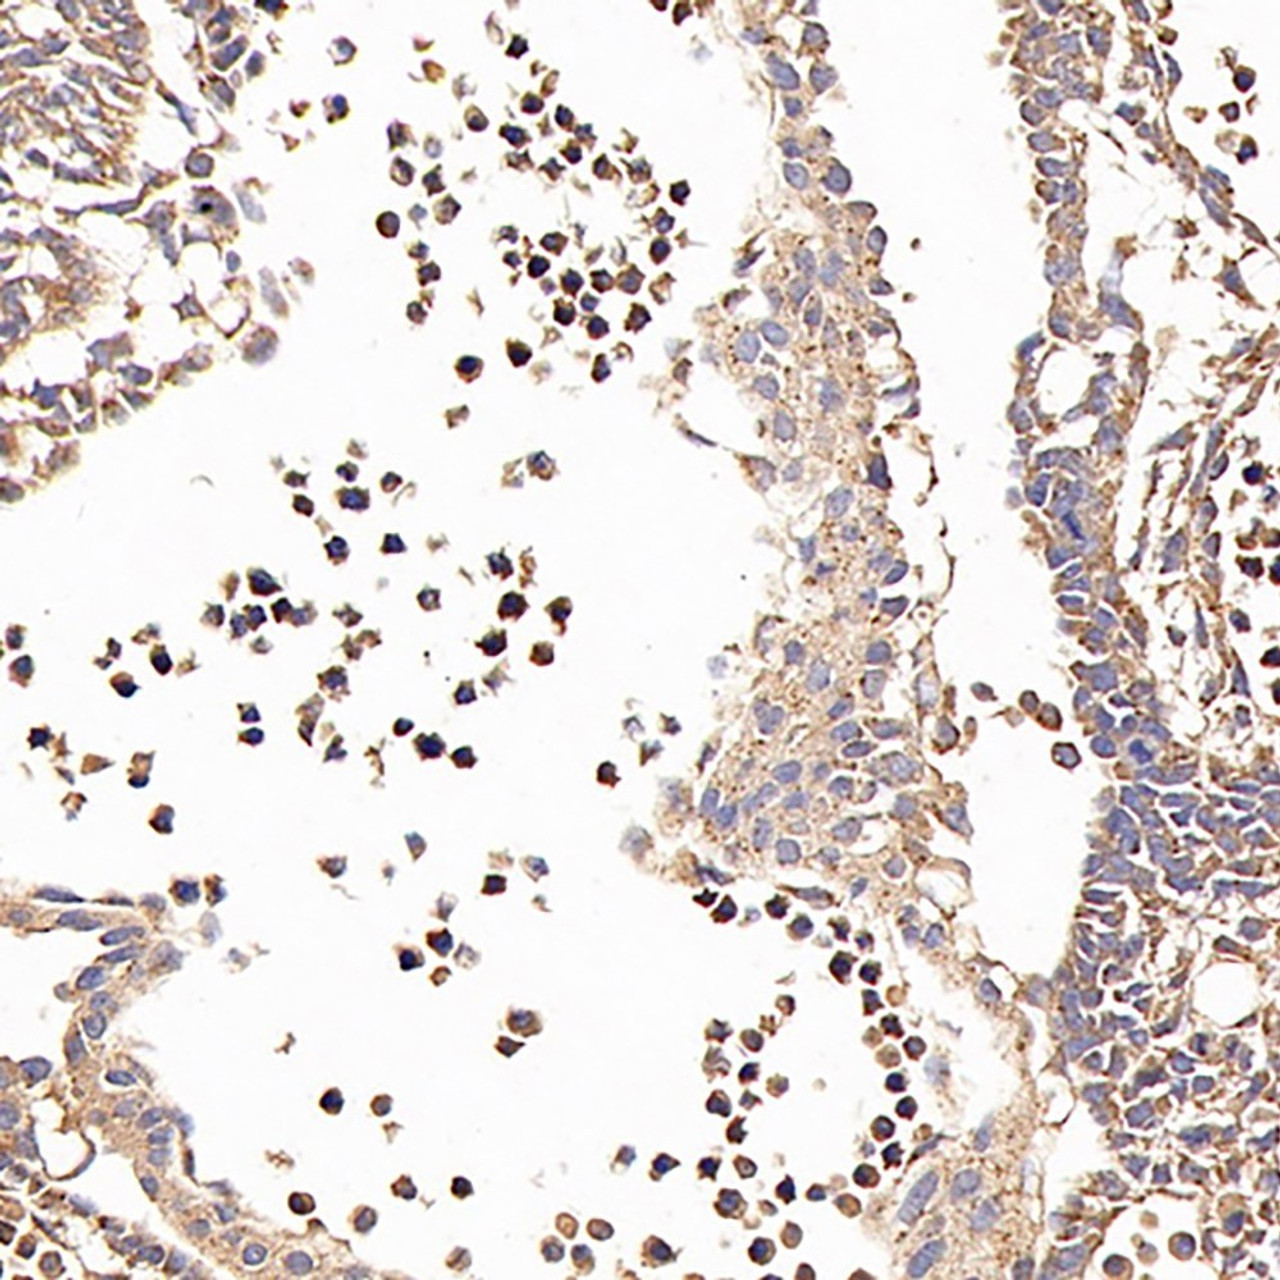 Immunohistochemistry analysis of paraffin-embedded fetal rat  using CD133 Monoclonal Antibody at dilution of 1:200.